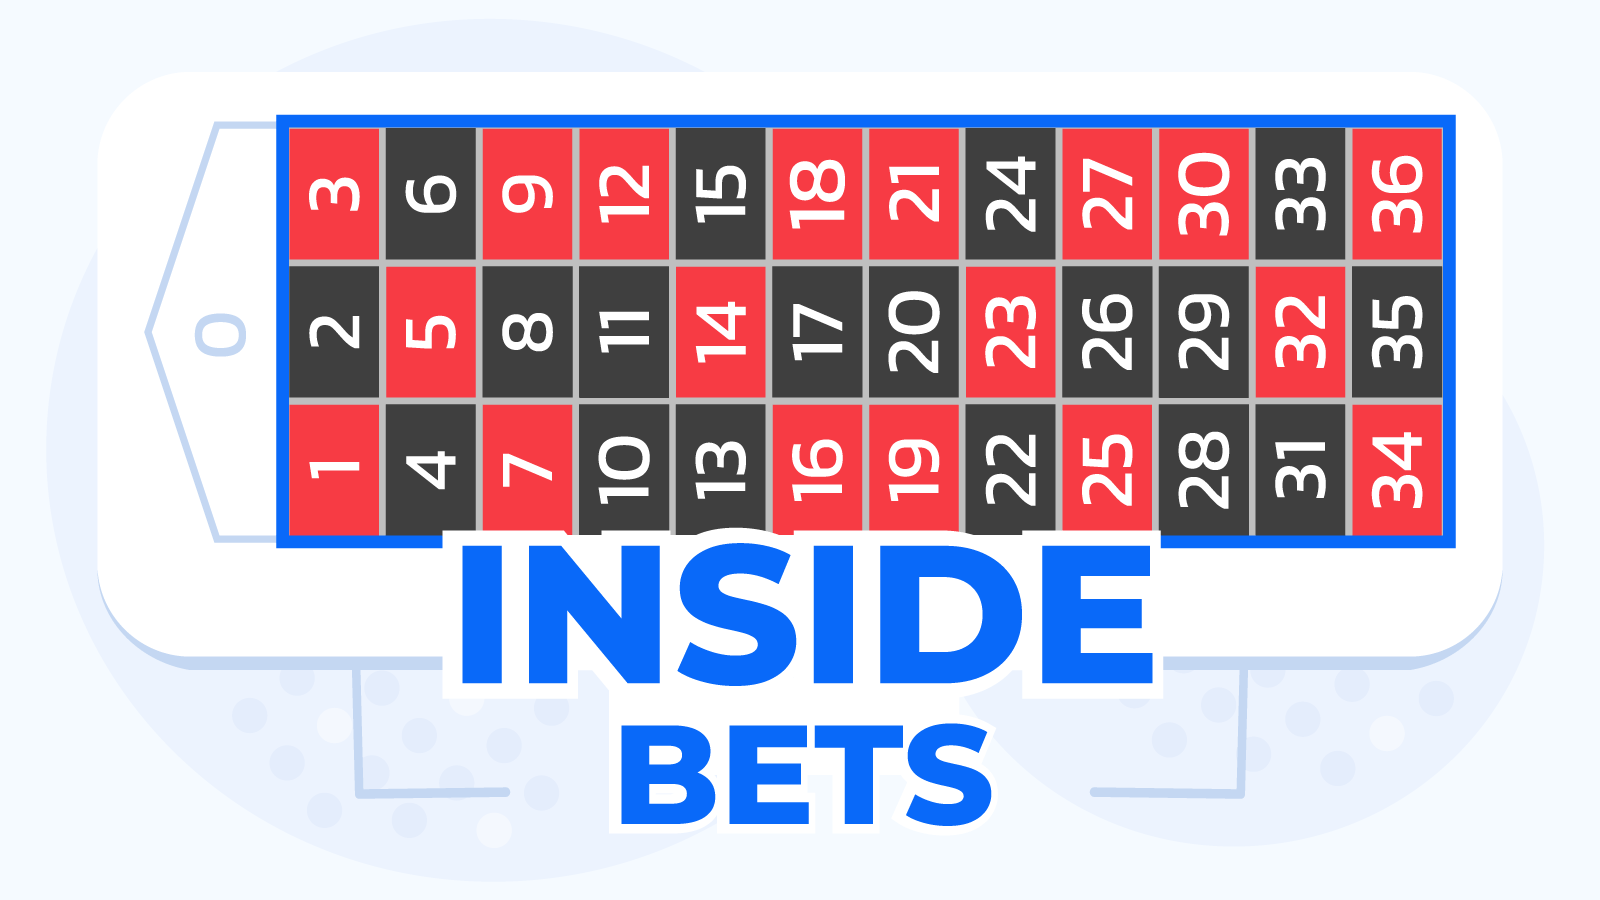 How Roulette Inside Bets Work: Tips & Strategies